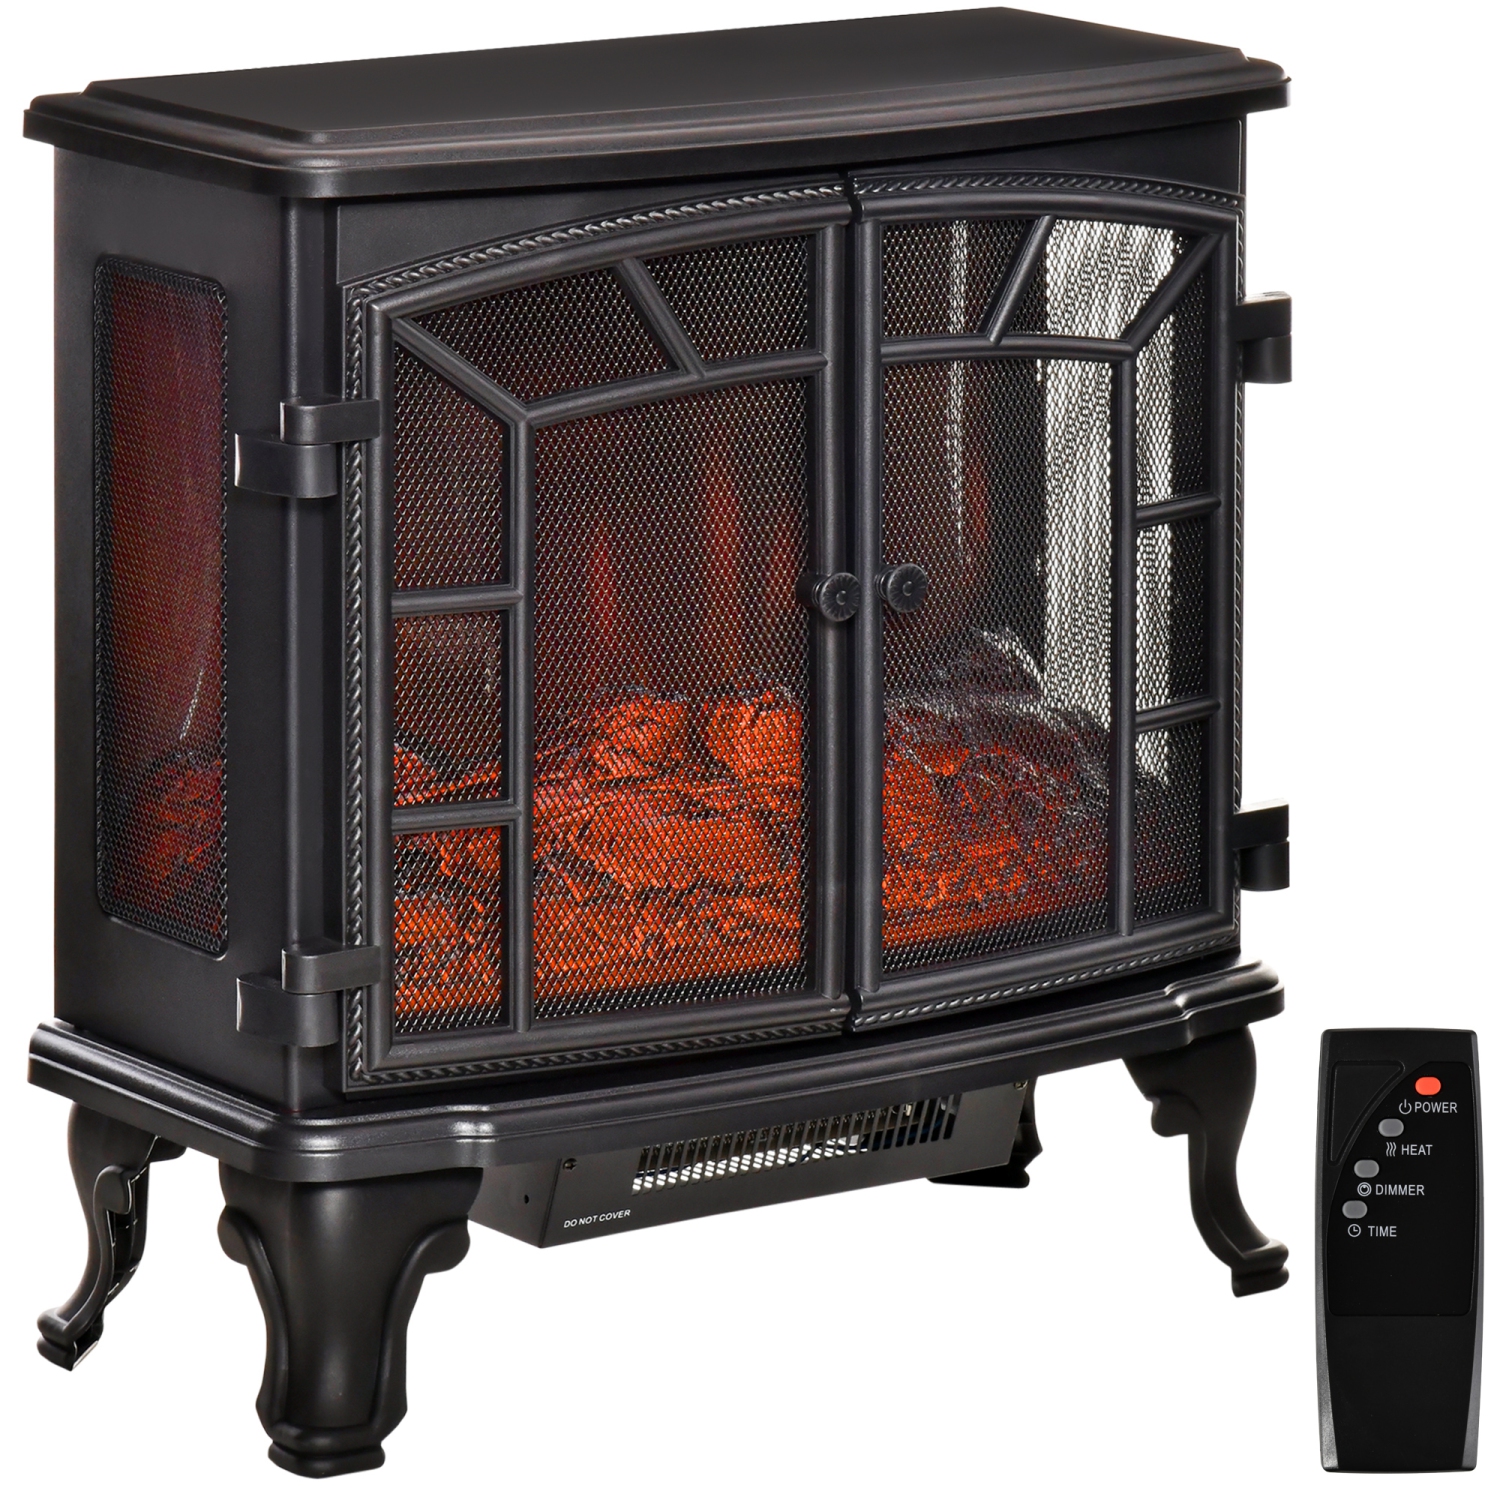 HOMCOM Electric Fireplace Heater, Freestanding Fireplace Stove with Realistic Flame Effect, Timer, Remote, 750W/1500W, Black